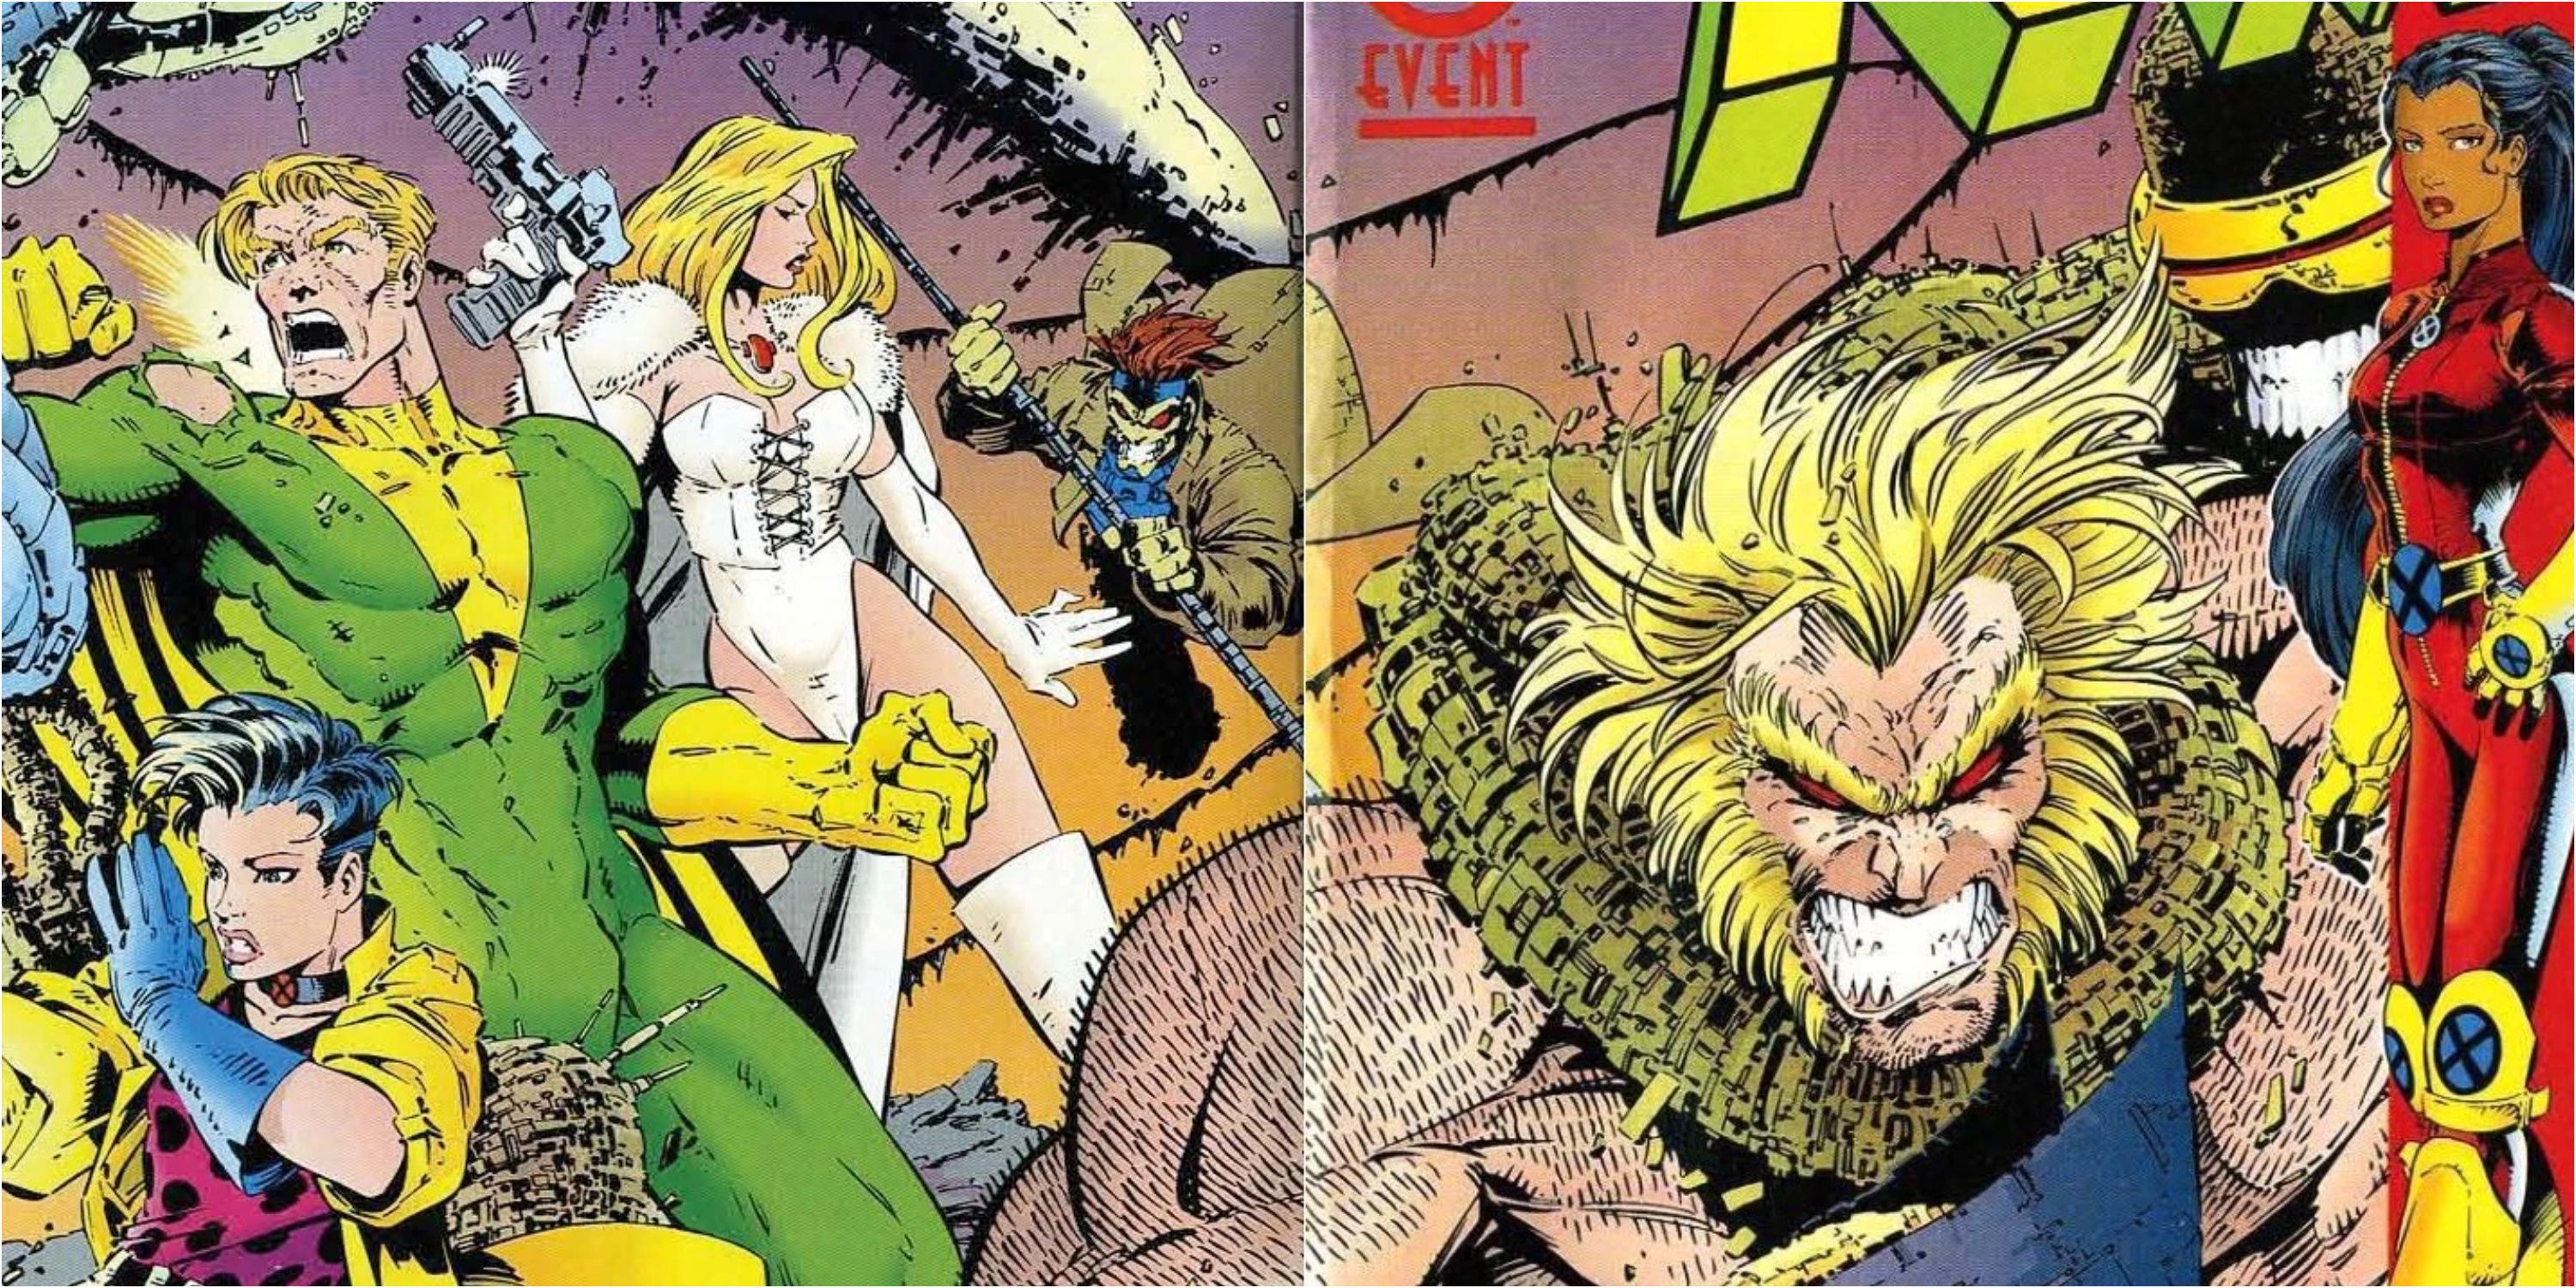 M, Sabretooth, Banshee, Emma Frost, and Jubilee fighting the Phalanx